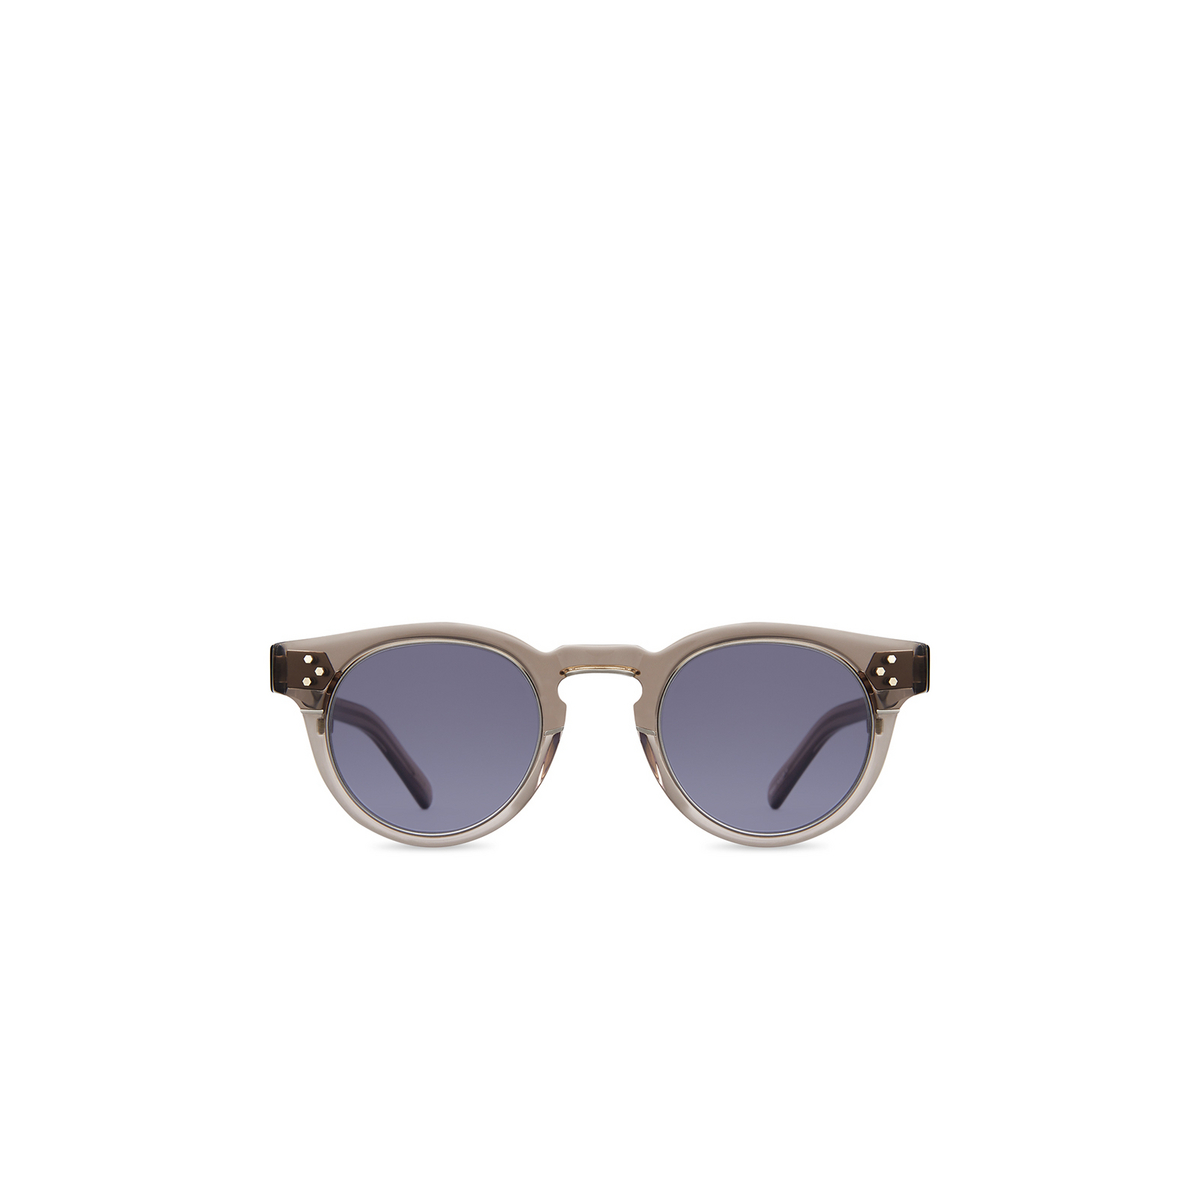 Mr. Leight KENNEDY S Sunglasses GRYCRY-MPLT/PACIG Grey Crystal-Matte Platinum - front view